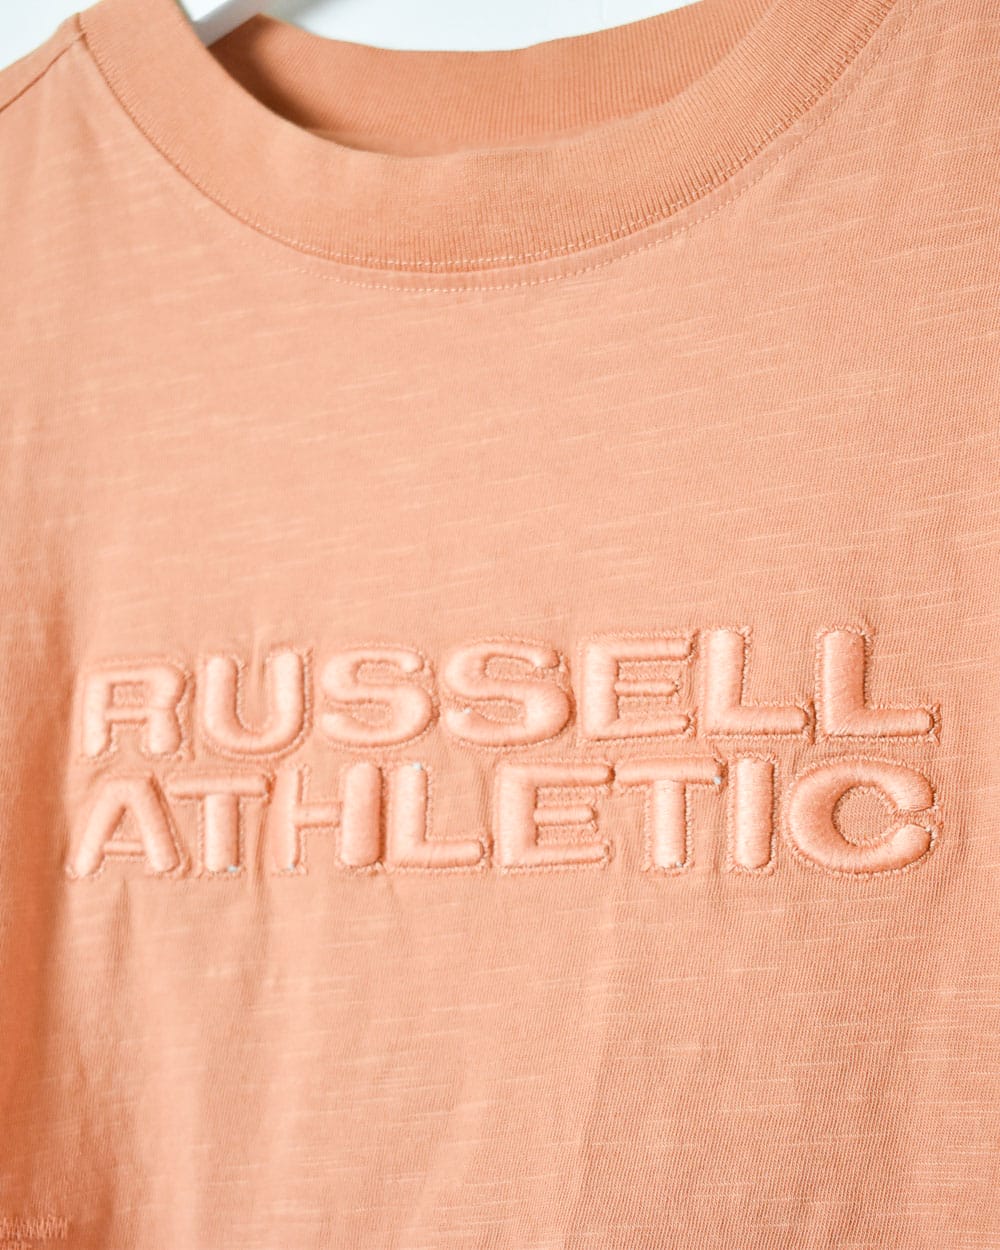 Orange Russell Athletic T-Shirt - Small